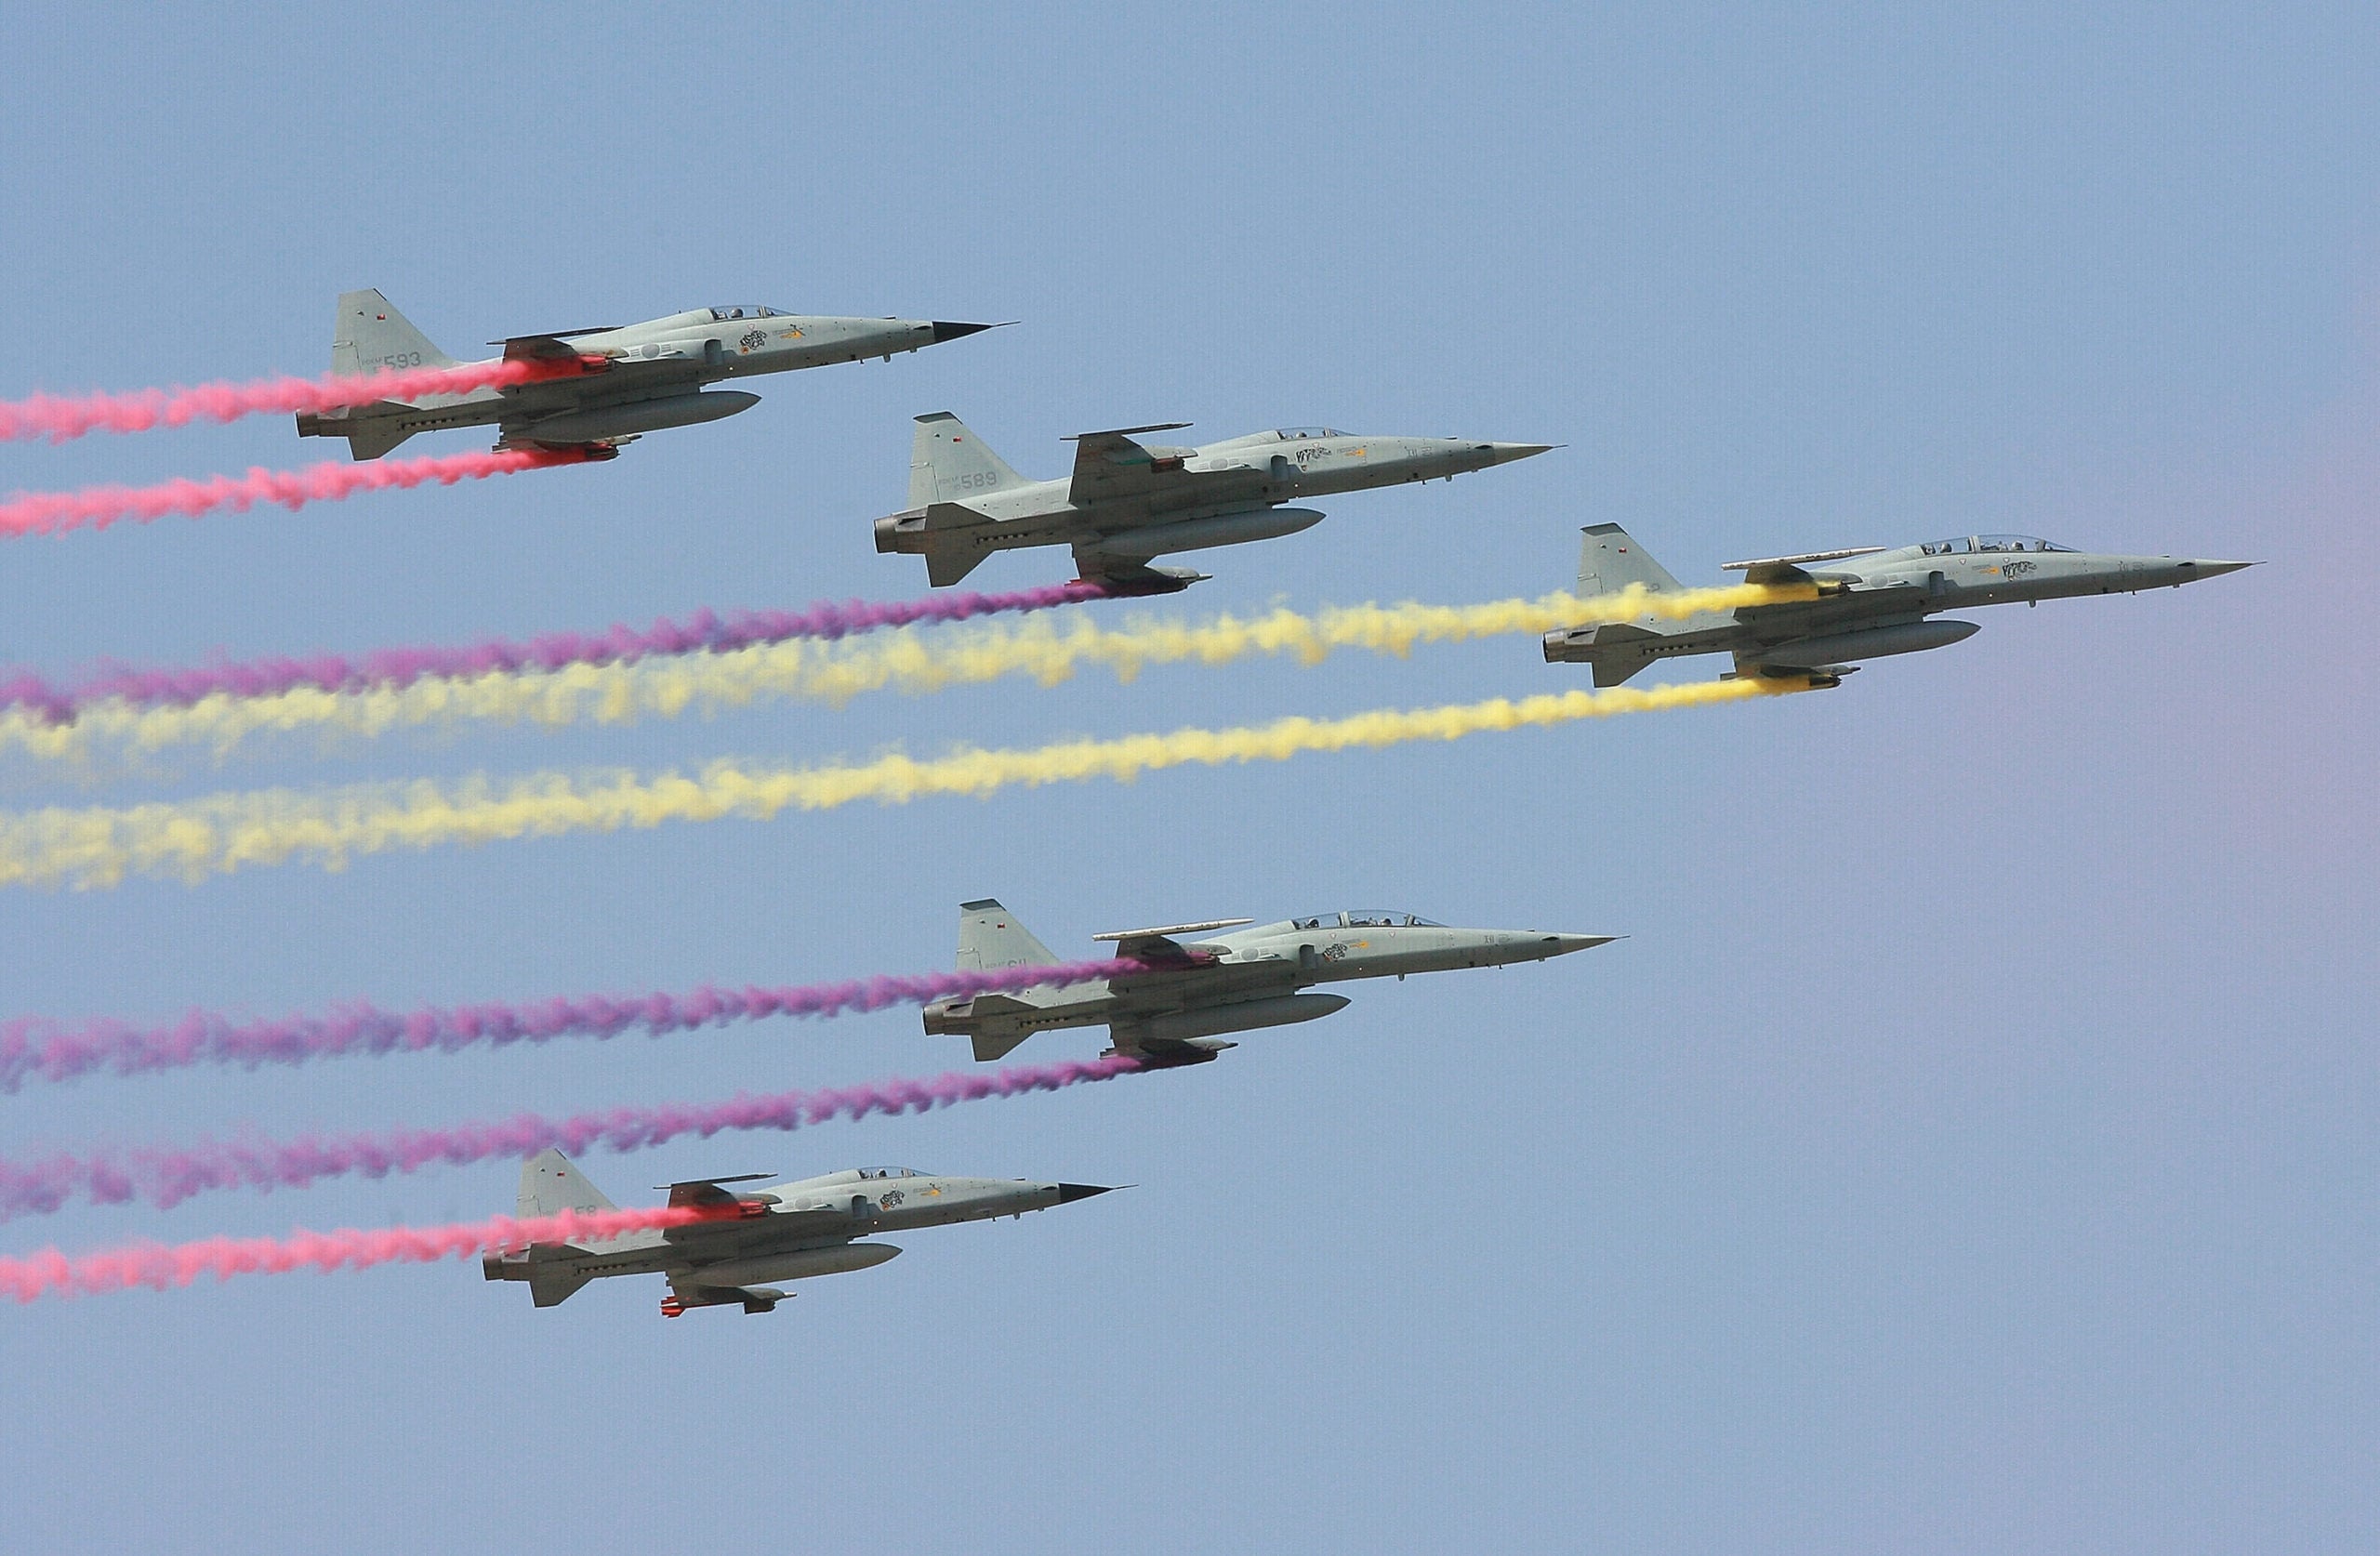 SEOUL, SOUTH KOREA - OCTOBER 20:  The South Korean Airforce F5E team fly in formation during the Seoul Airshow 2009 and Seoul International Aerospace and Defense Exhibition (ADEX) 2009 at the Sungnam military air base on October 20, 2009 in Seoul, South Korea. The Seoul International Aerospace and Defense Exhibition (ADEX) 2009, the biggest air-show in the Asian-Pacific region will be held on October 20 - 25 at Seoul airport including 300 companies from 30 countries.  (Photo by Chung Sung-Jun/Getty Images)